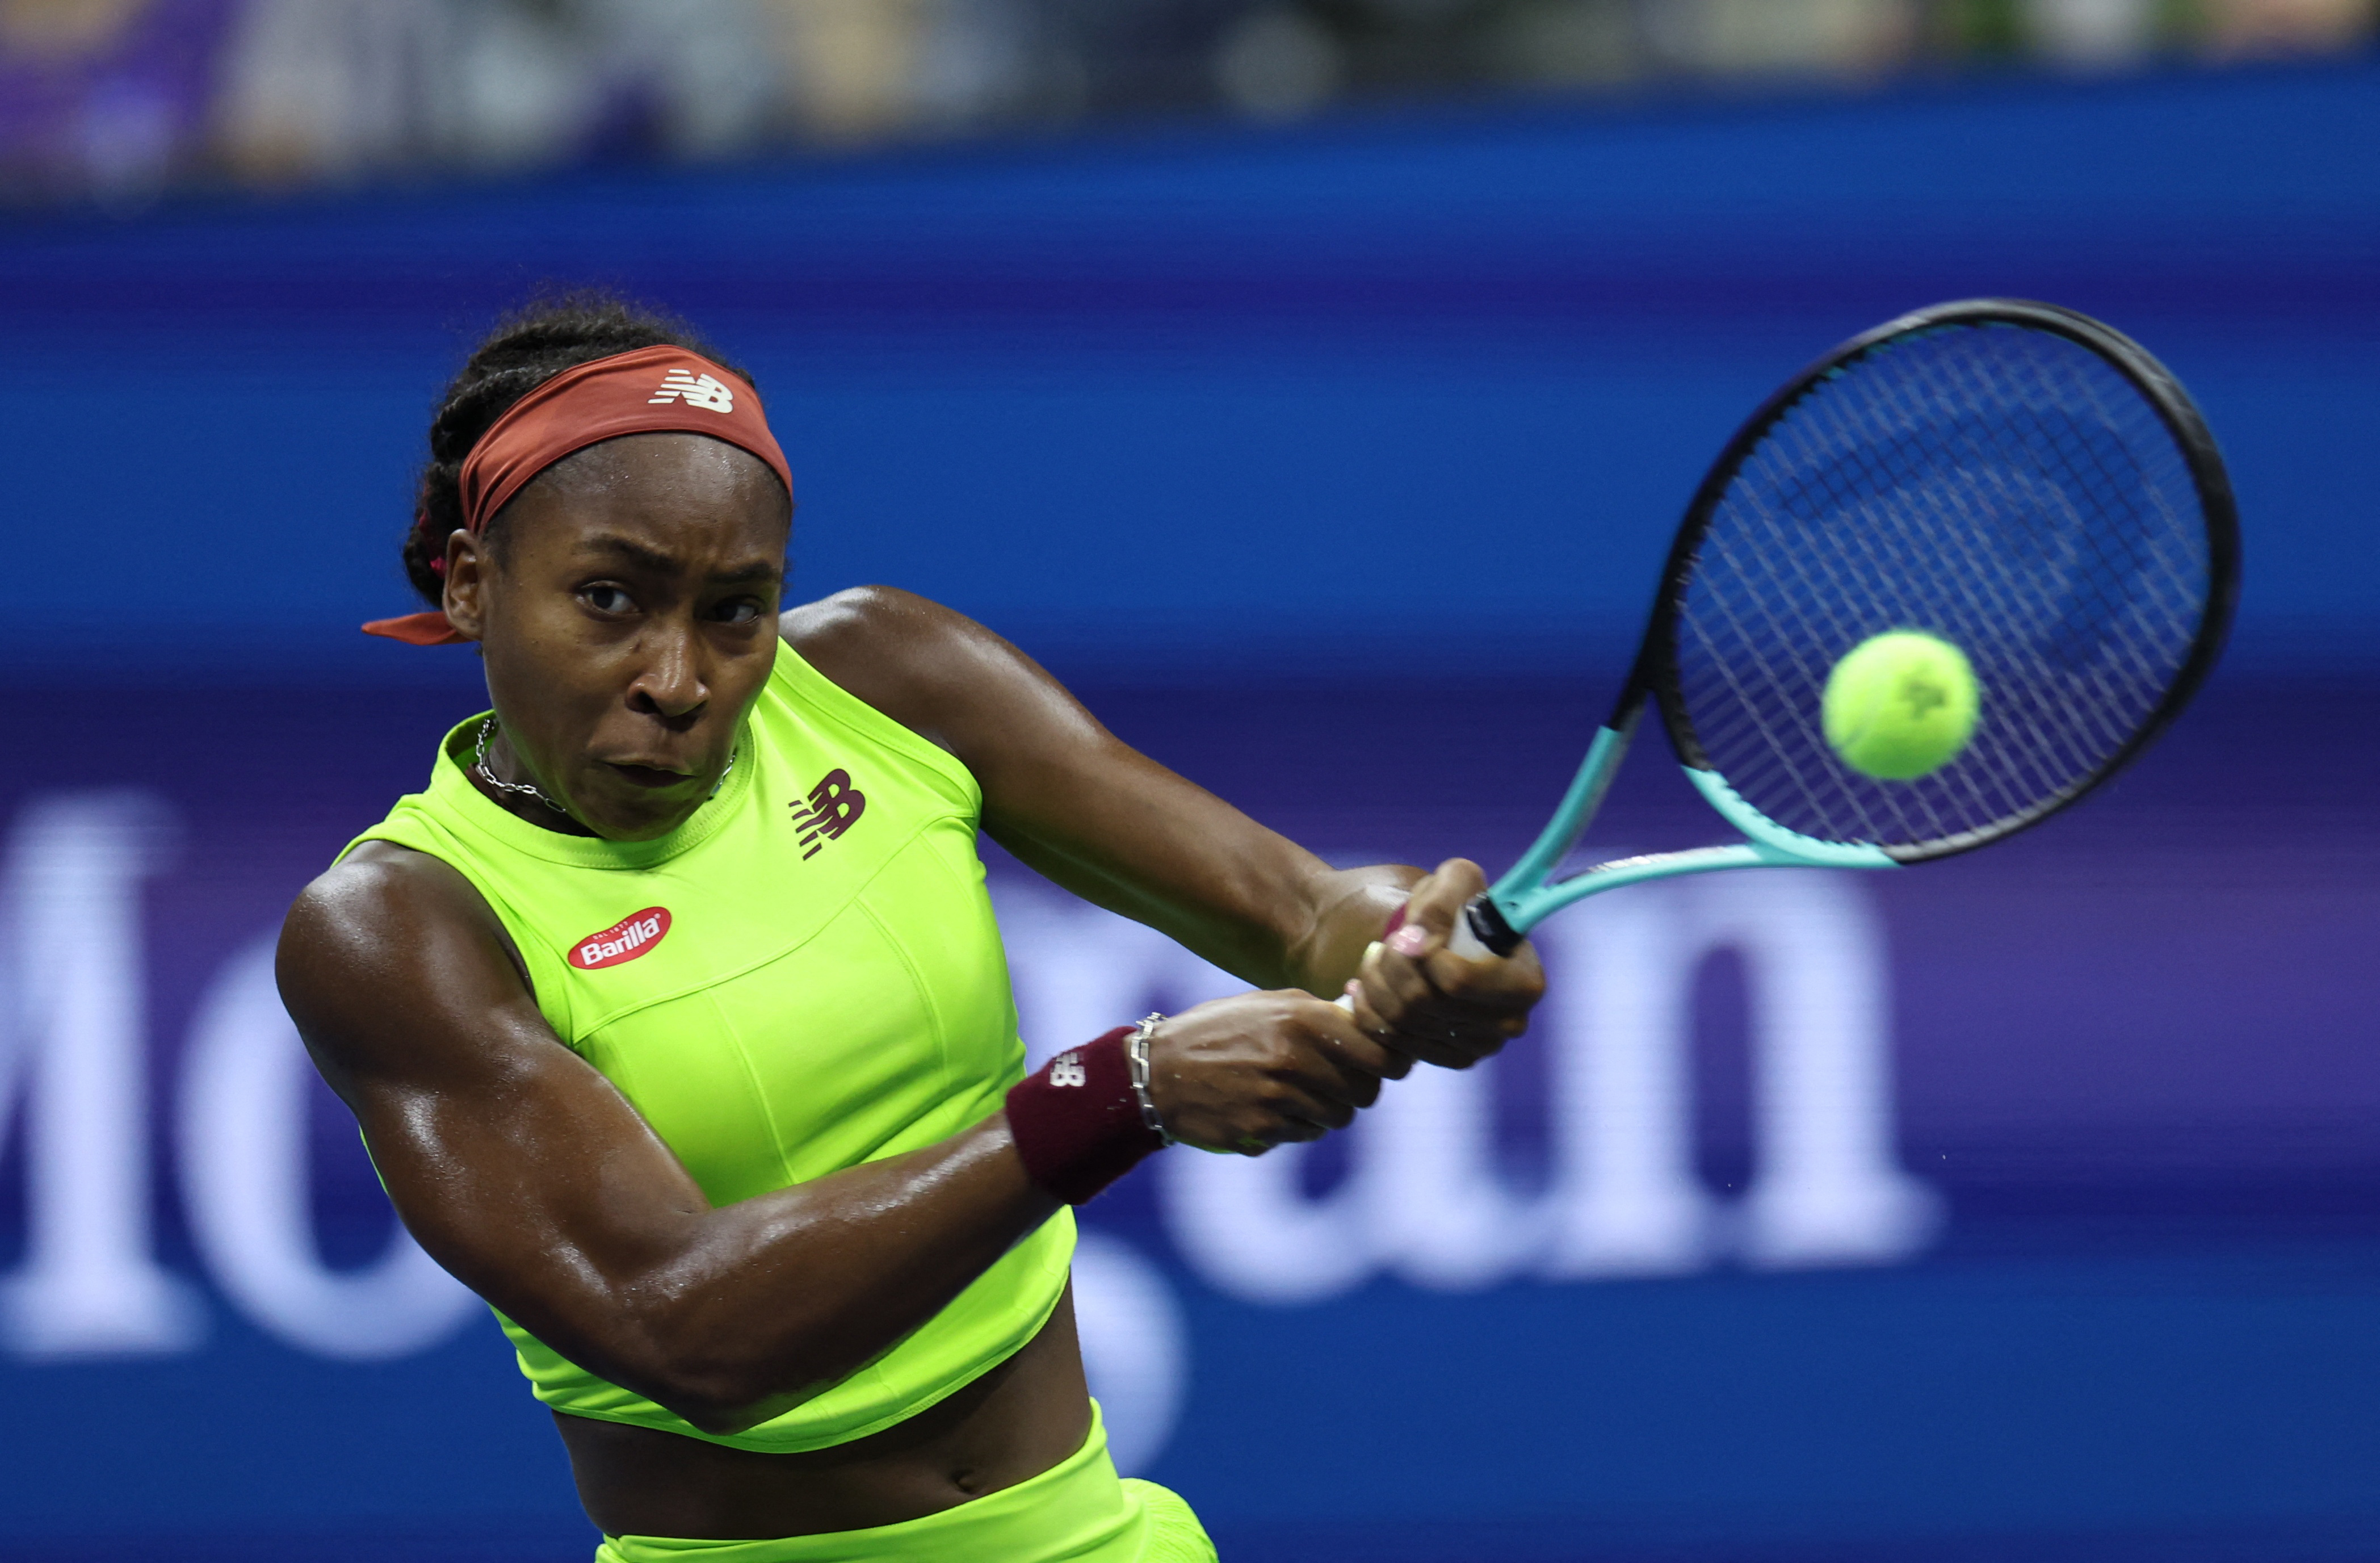 Gauff beats Muchova to reach US Open final after protesters disrupt match Reuters